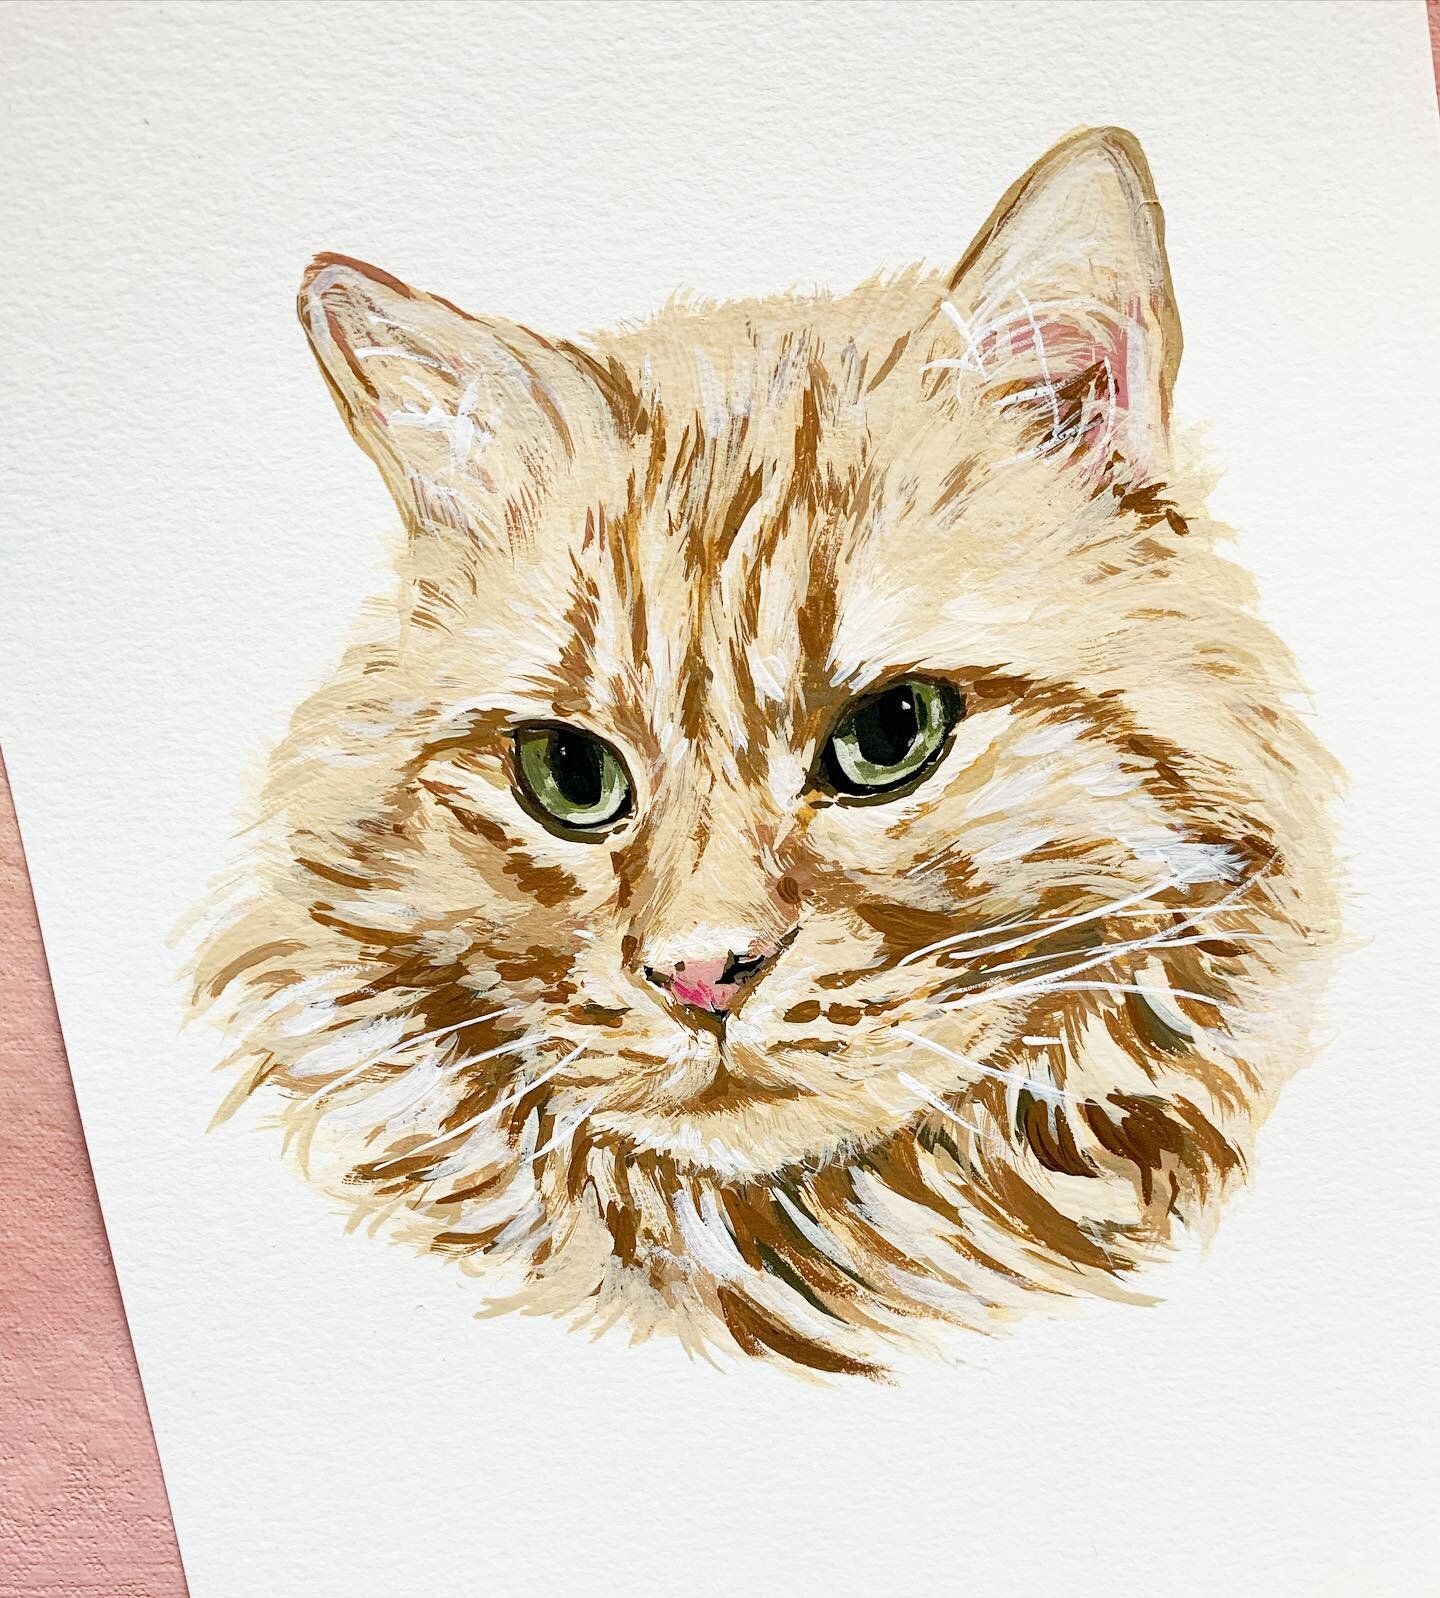 I&rsquo;m 1000% happier when the sun is shining. ☀️ And when I&rsquo;m painting your sweet pets. 🐾 
.
.
.
.
#petportrait #petportraitartist #catpainting #catportrait #pets #custompetportrait #custompetportraits #custom #art #gouache #gouachepainting